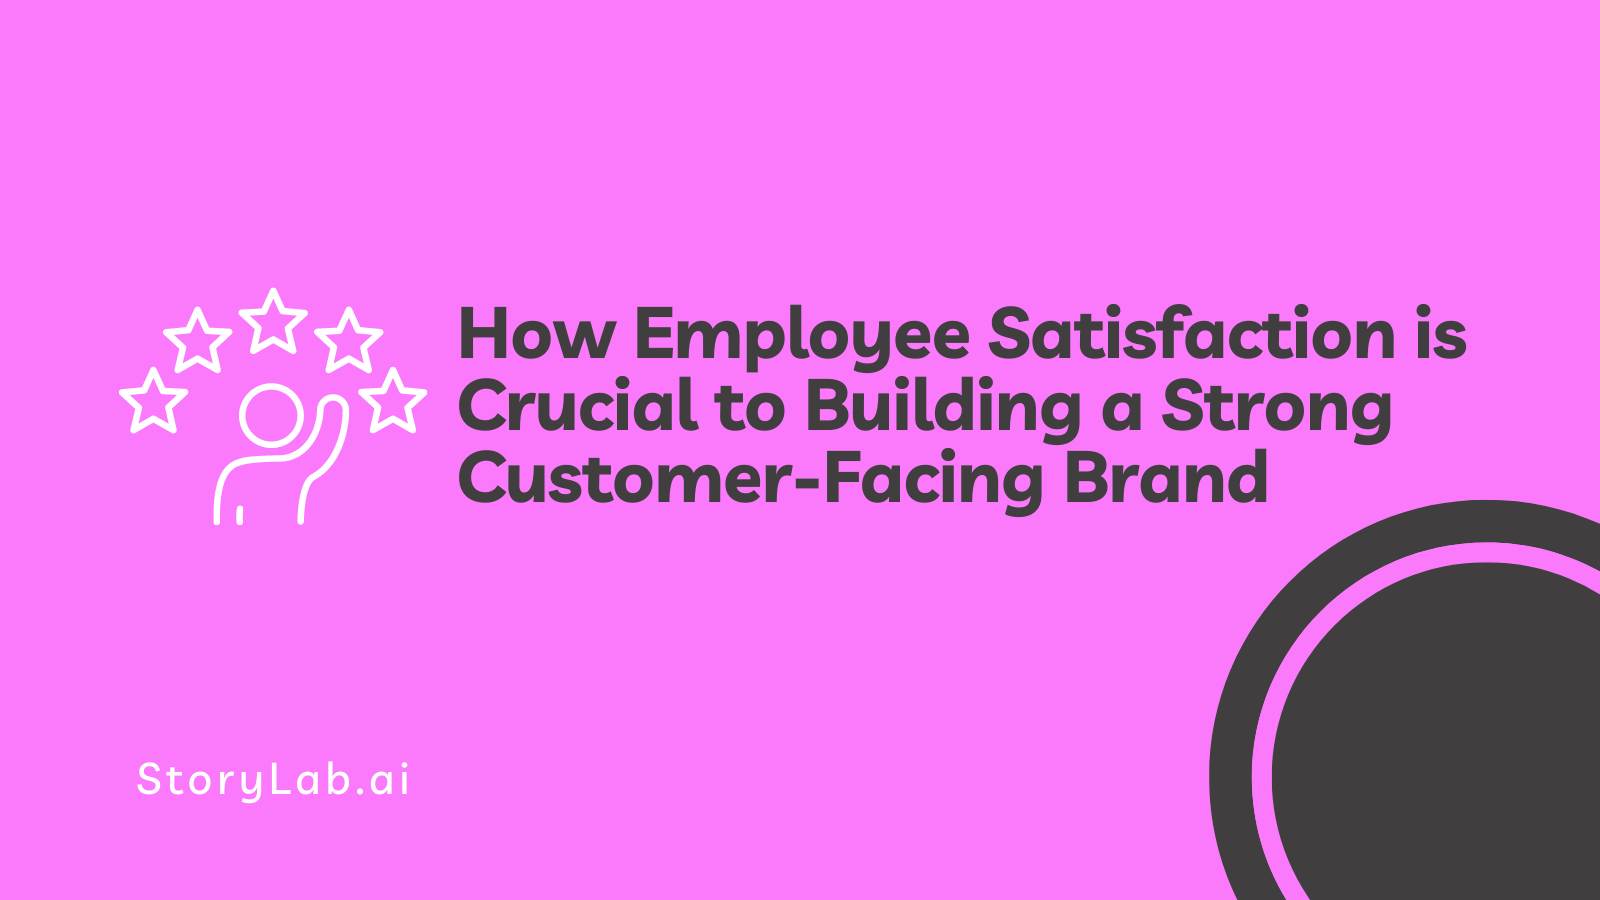 How Employee Satisfaction is Crucial to Building a Strong Customer-Facing Brand